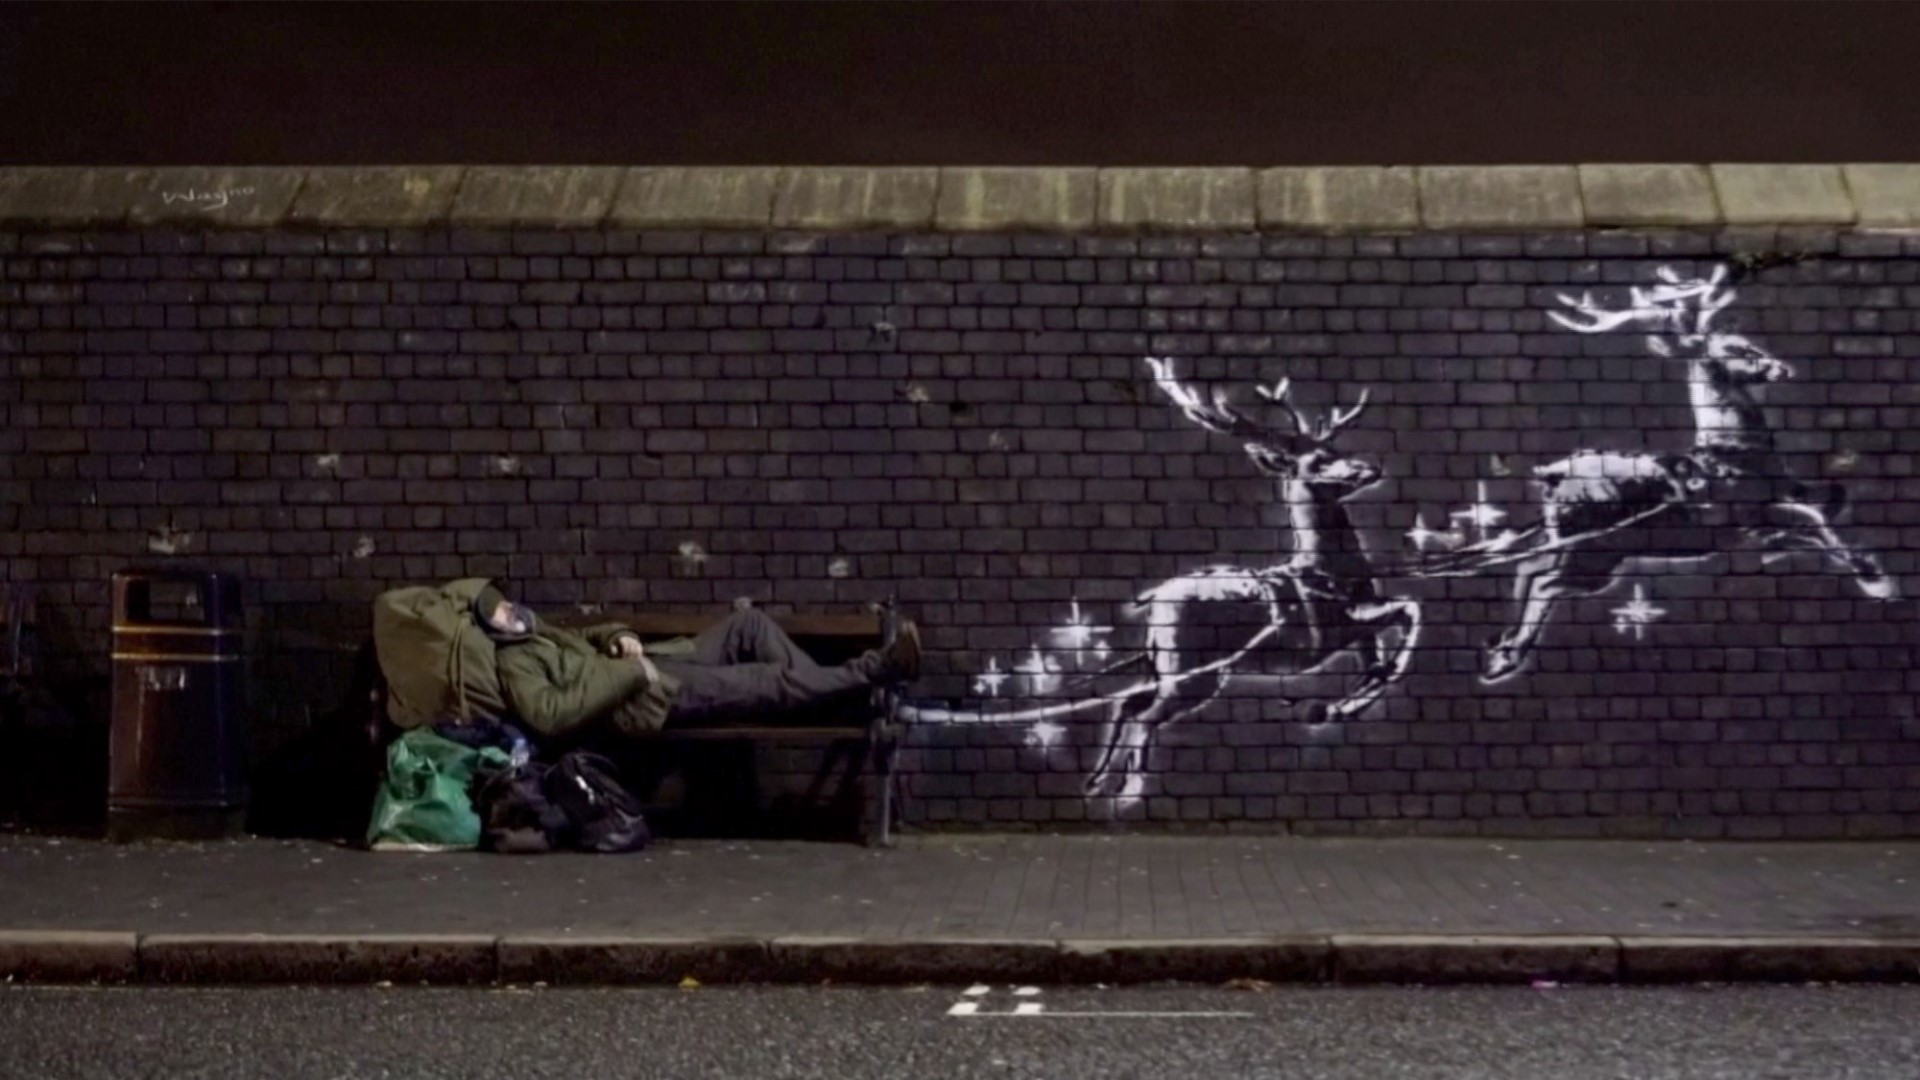 A new work by Banksy highlights an issue for Britain, especially during the holiday season. Veuer's Justin Kircher has the story.